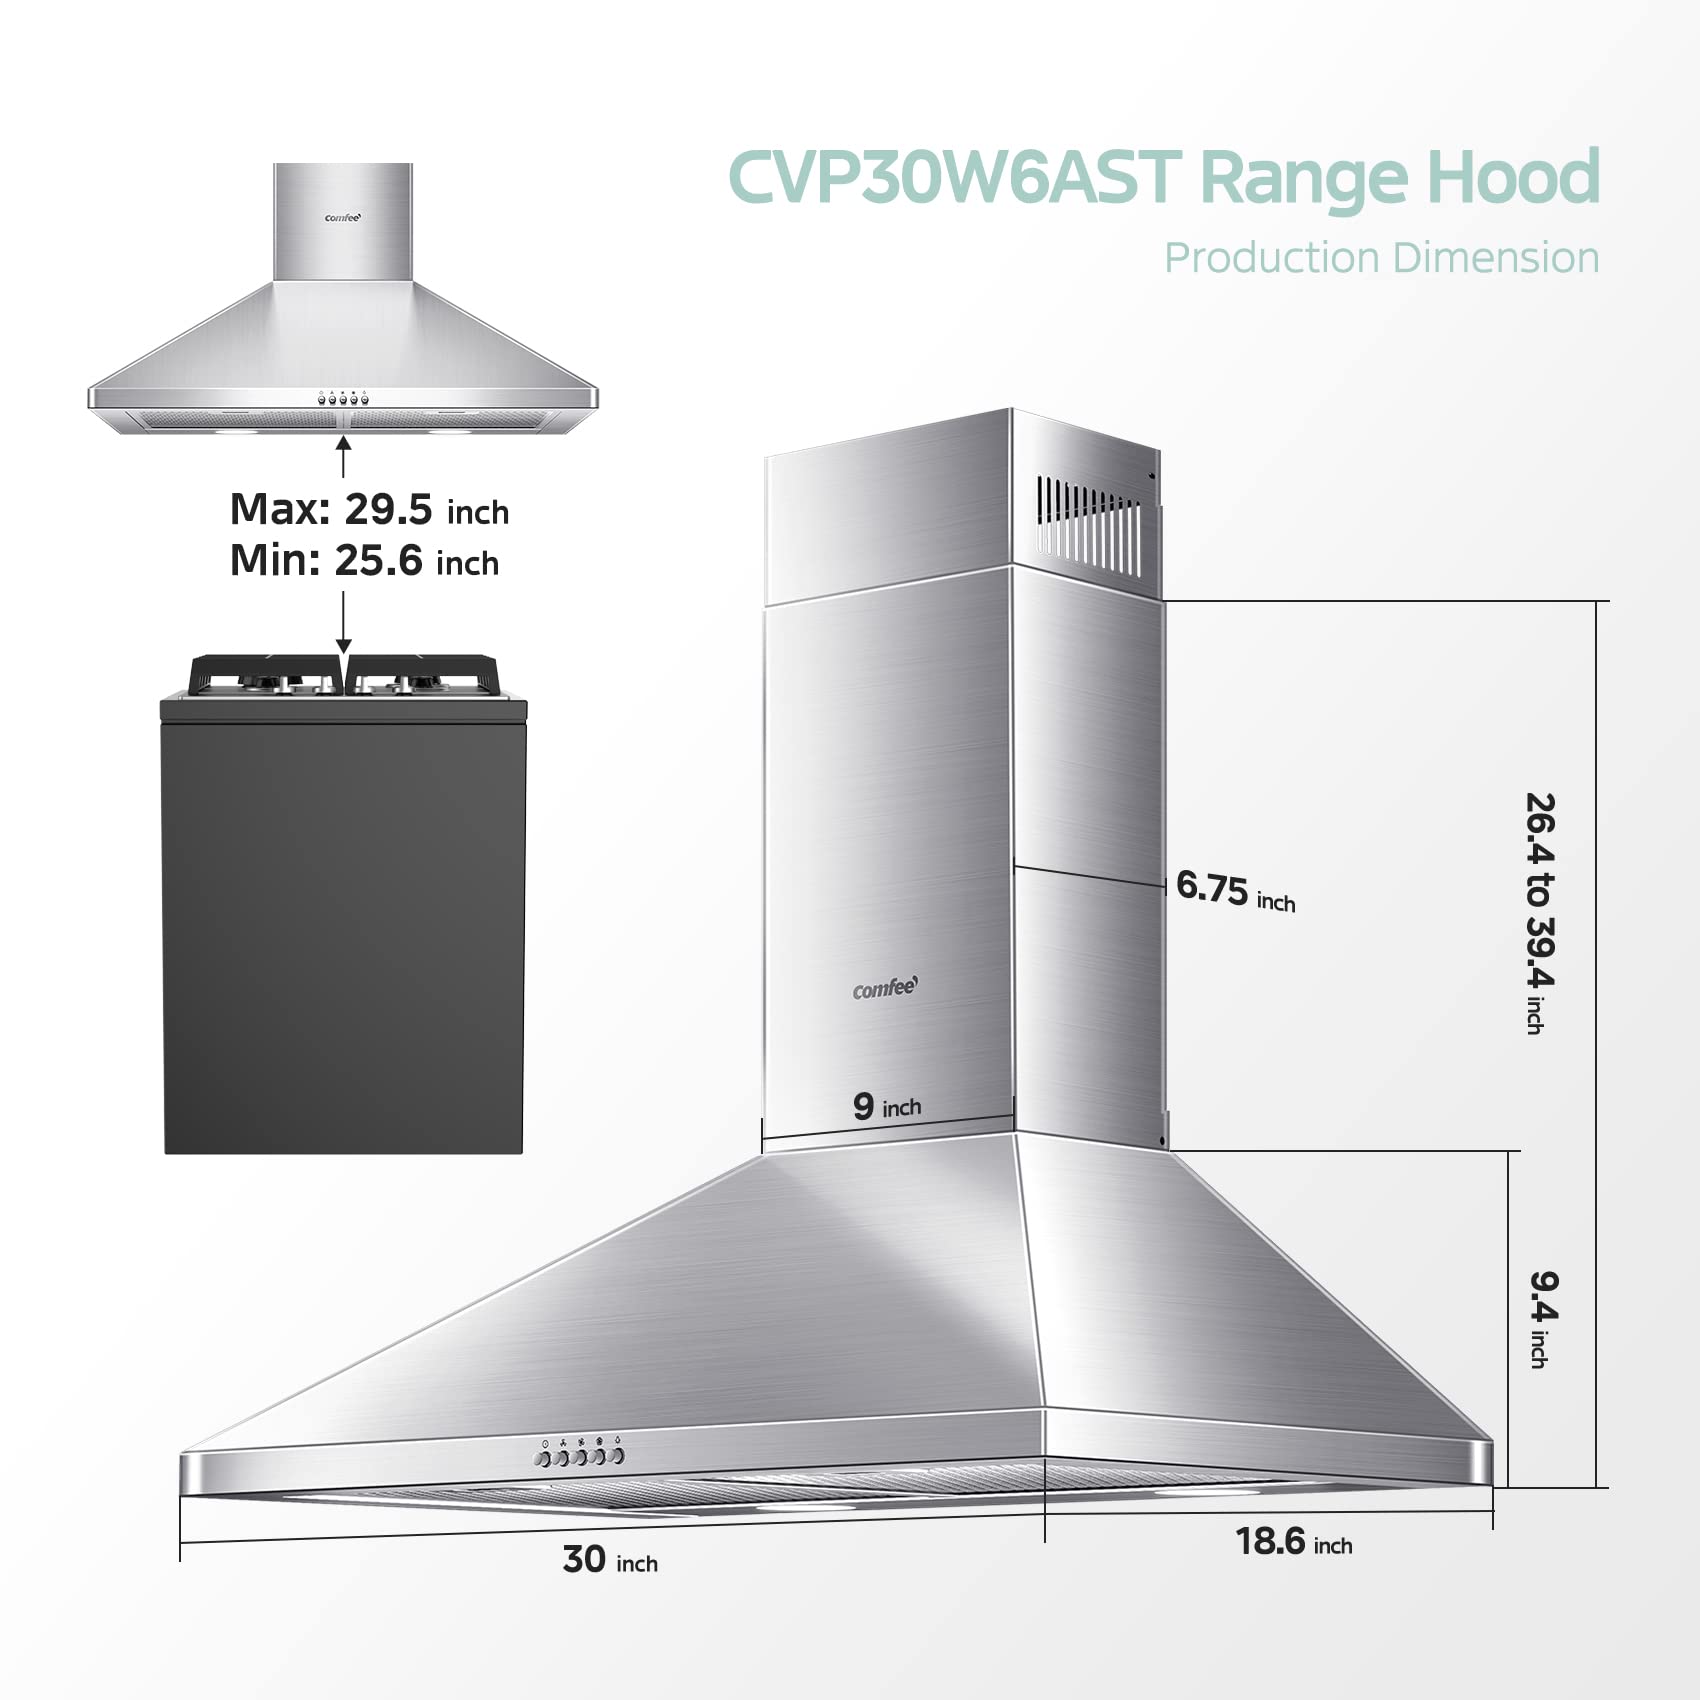 COMFEE' CVP30W6AST Ducted Pyramid Range 450 CFM Stainless Steel Wall Mount Vent Hood with 3 Speed Exhaust Fan, 5-Layer Aluminum Permanent Filters, Two LED Lights, Convertible to Ductless, 30 inches